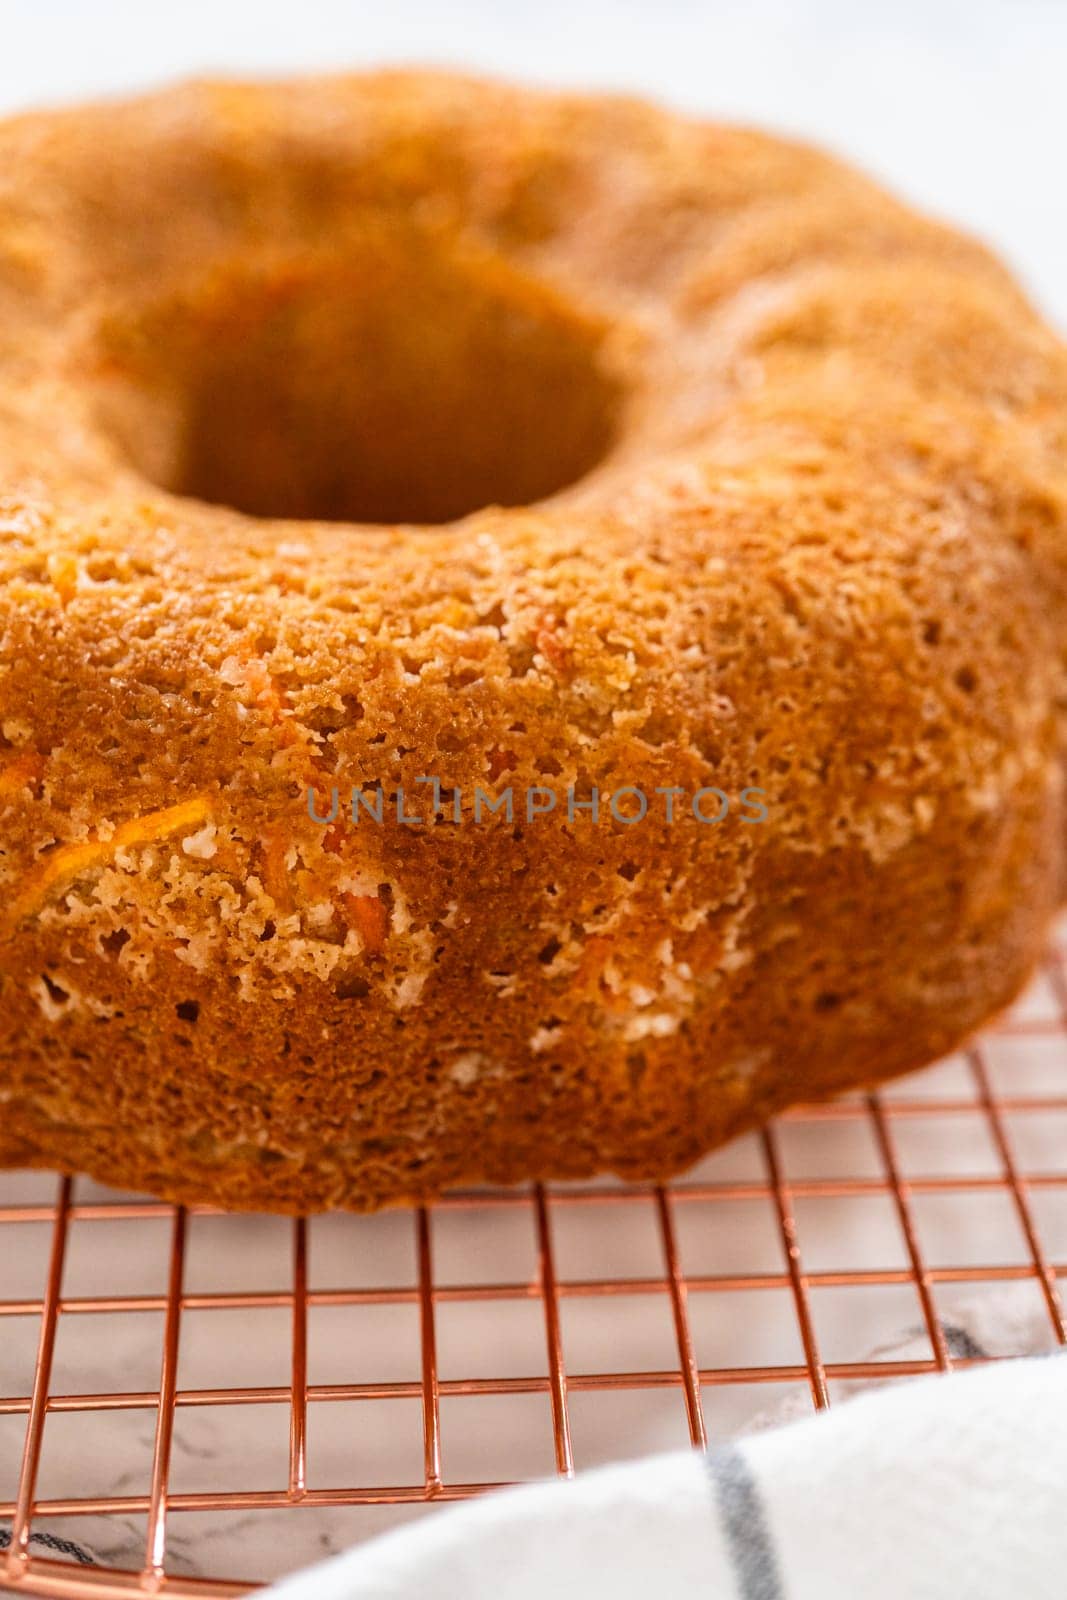 The freshly baked Carrot Bundt Cake is left to cool on the kitchen counter, filling the air with delightful aromas.